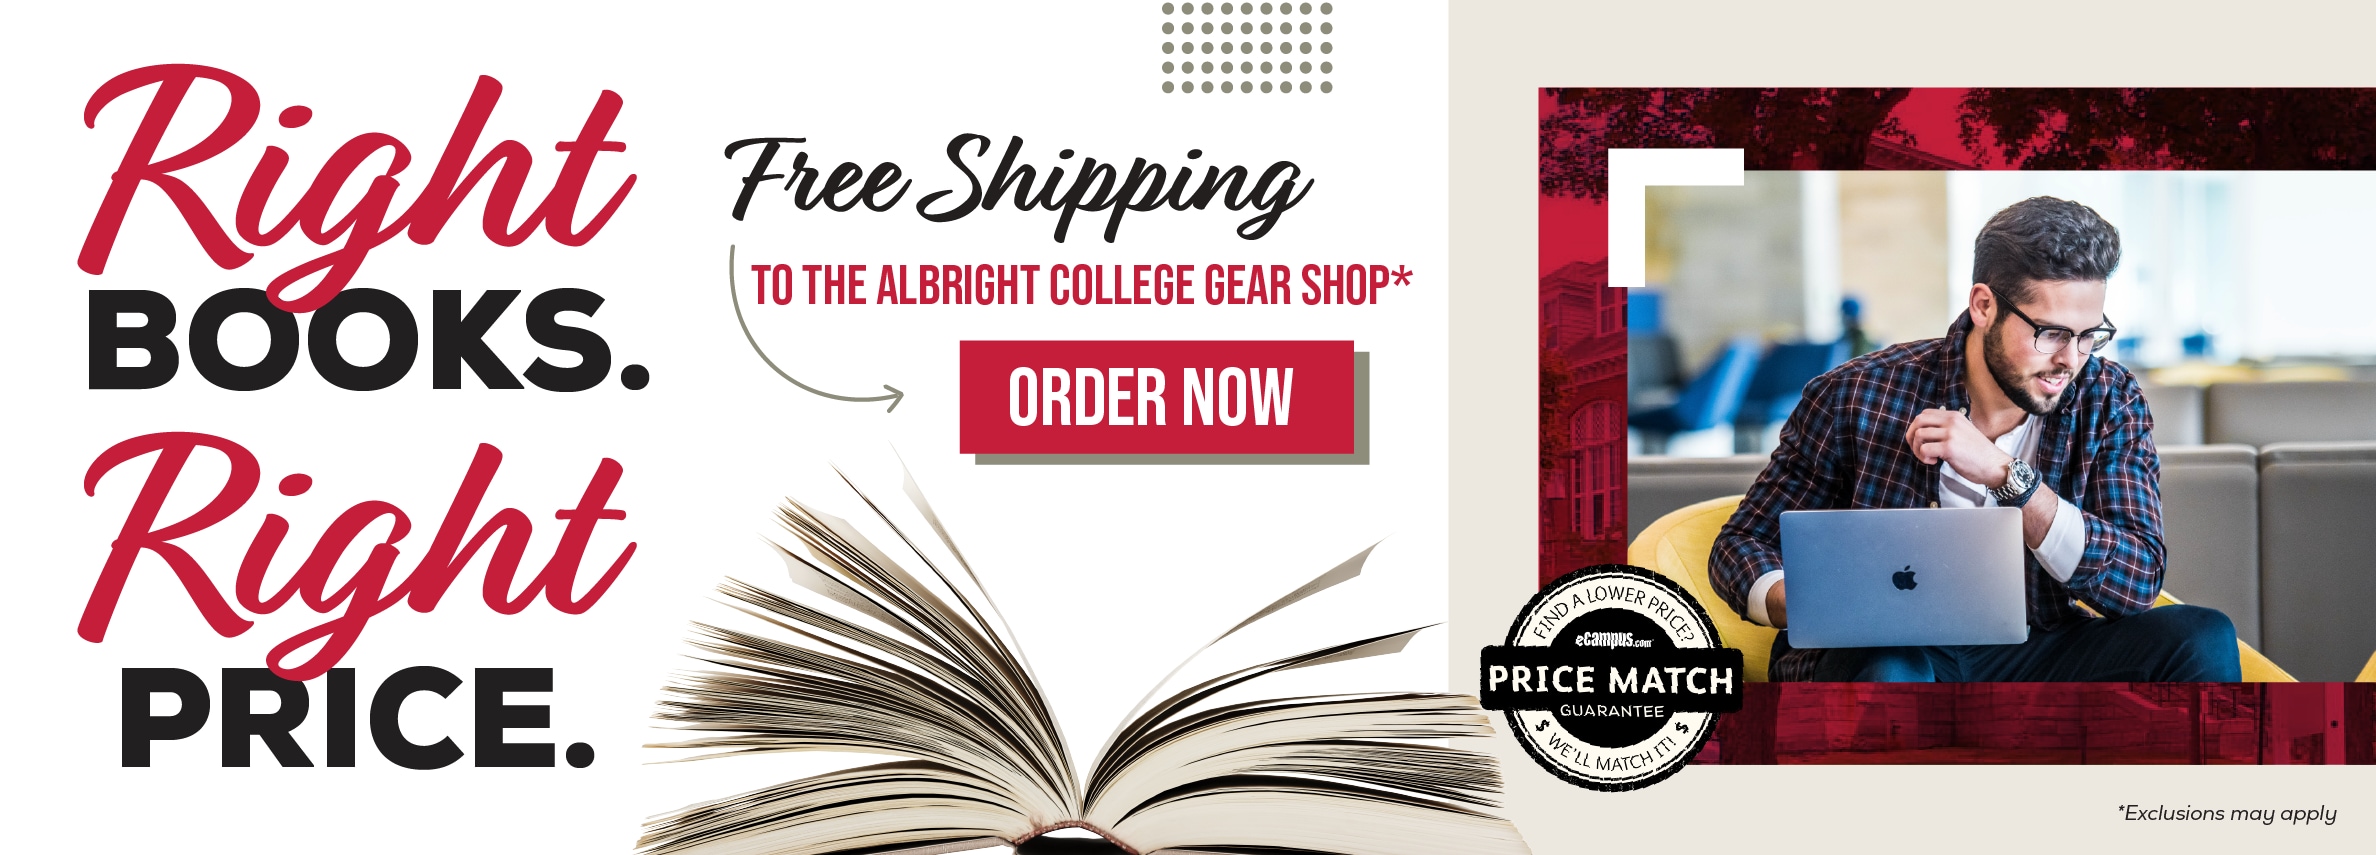 Right books. Right price. Free shipping to the Albright College Gear Shop.* Order now. Price Match Guarantee. *Exclusions may apply.